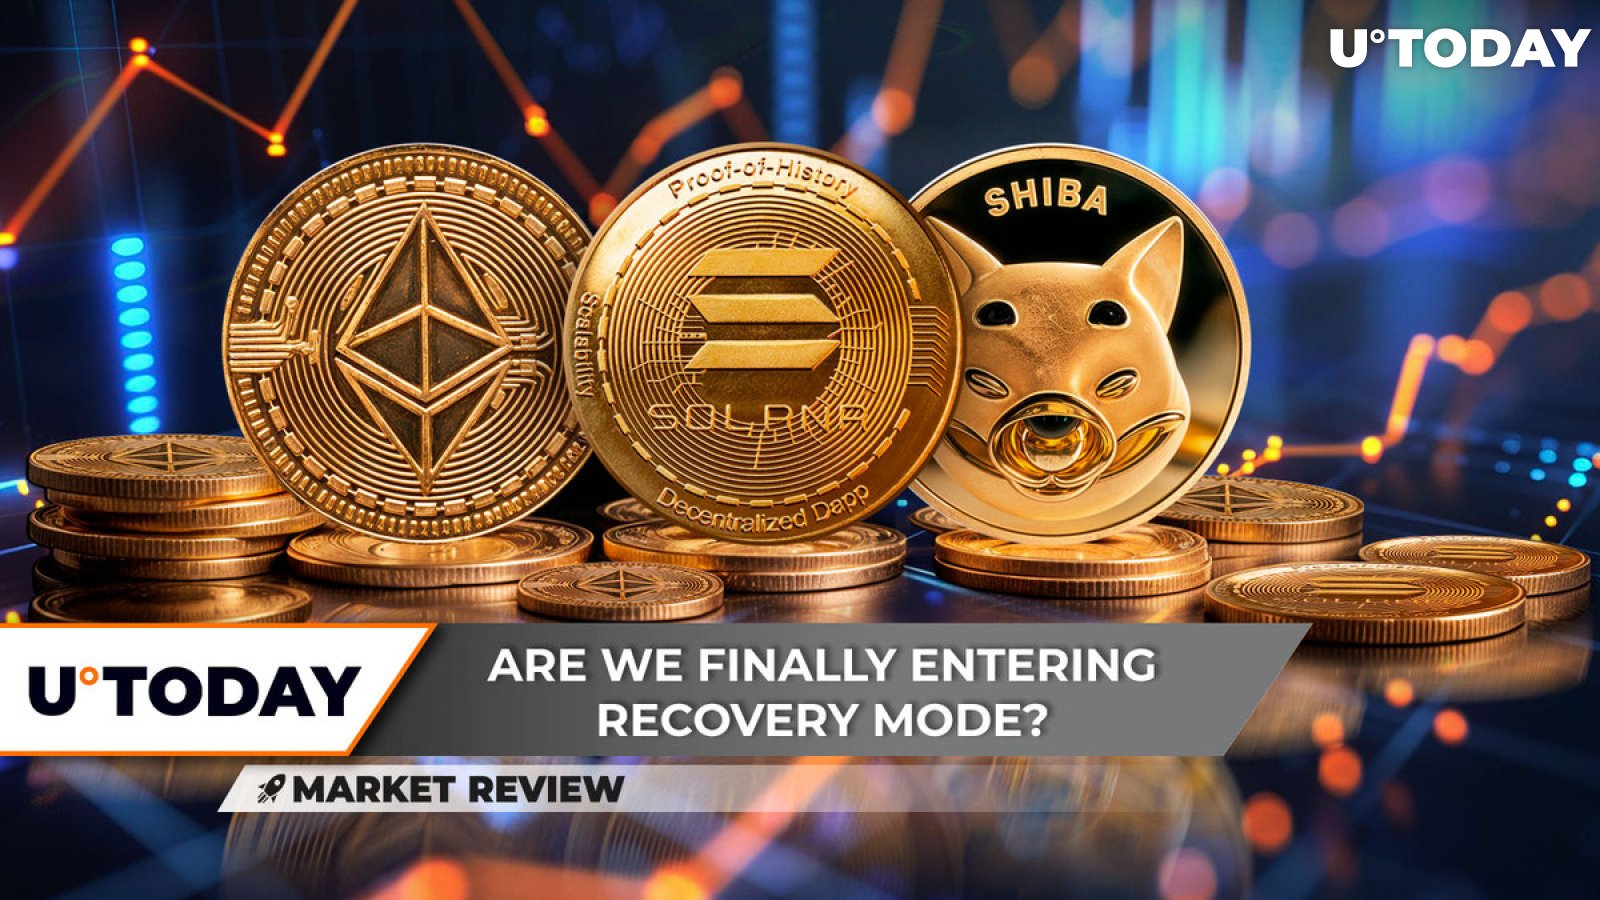 Ethereum (ETH) Bounce From $3,400 Imminent? Solana (SOL) Reversal Started: Here's Next Target, What's Happening With Shiba Inu (SHIB)?